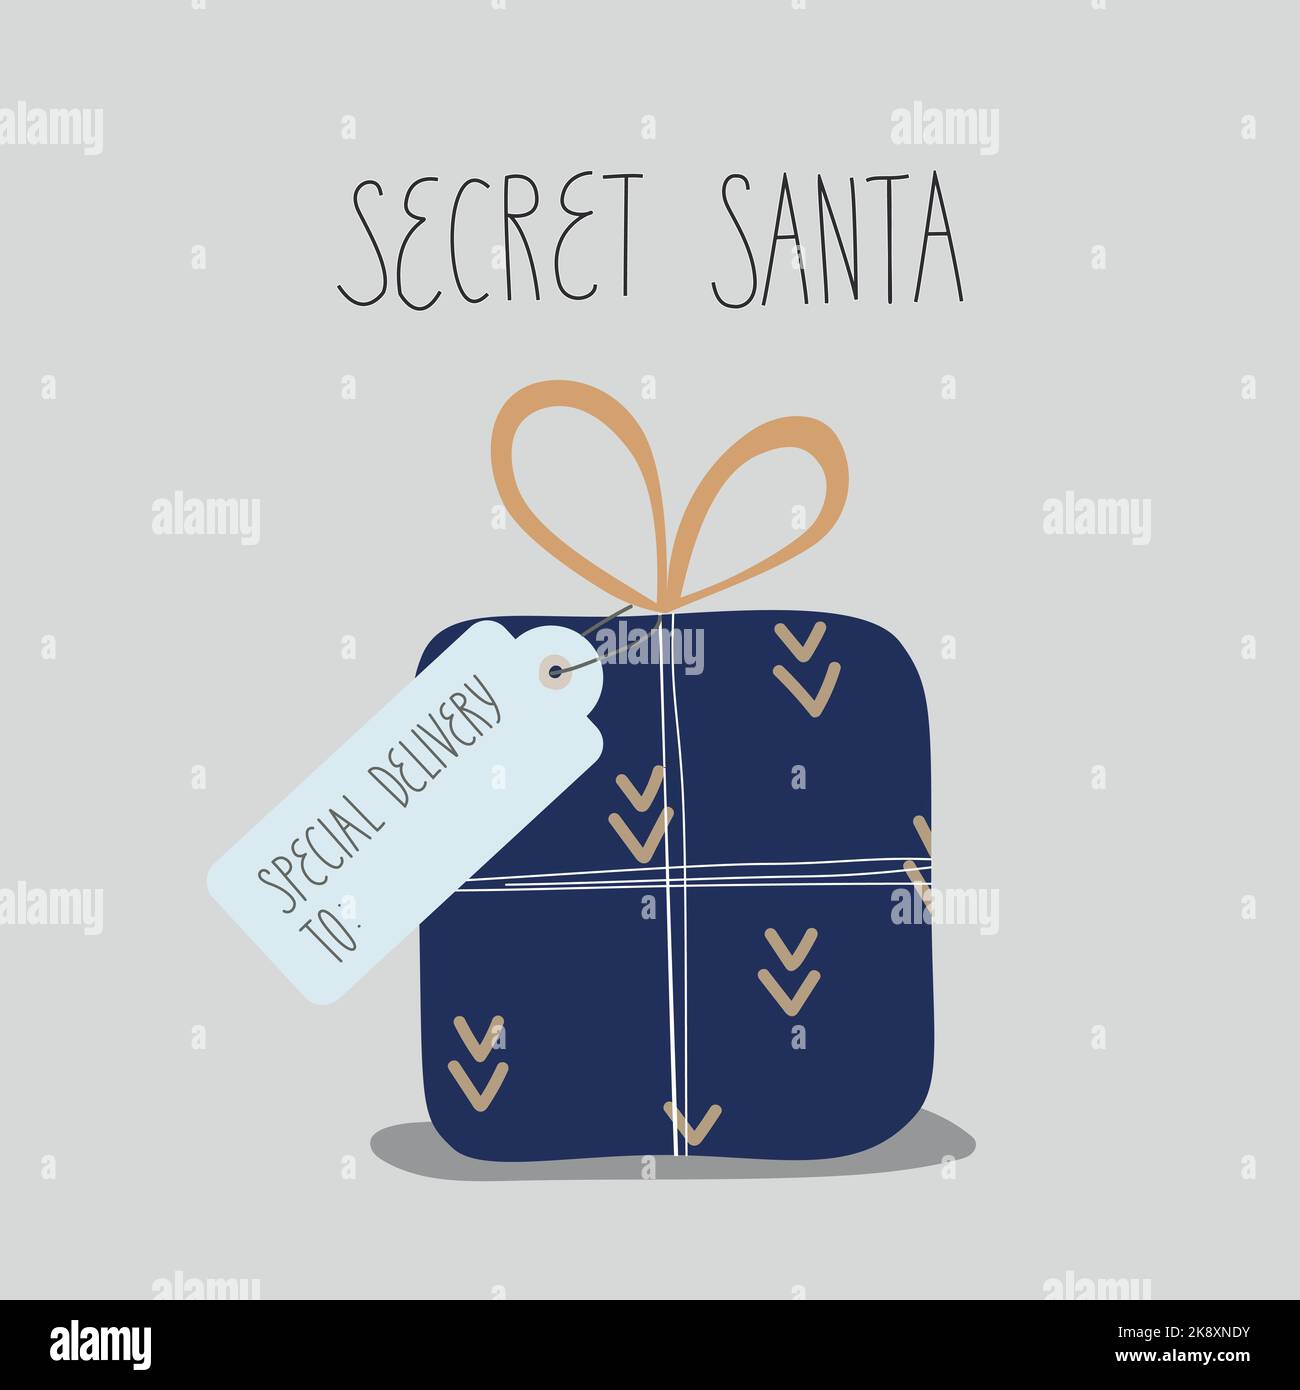 Stylish vector illustration with gift box, tag Special delivery, Lettering Secret Santa. Can use for card, sending of mail, banner Stock Vector